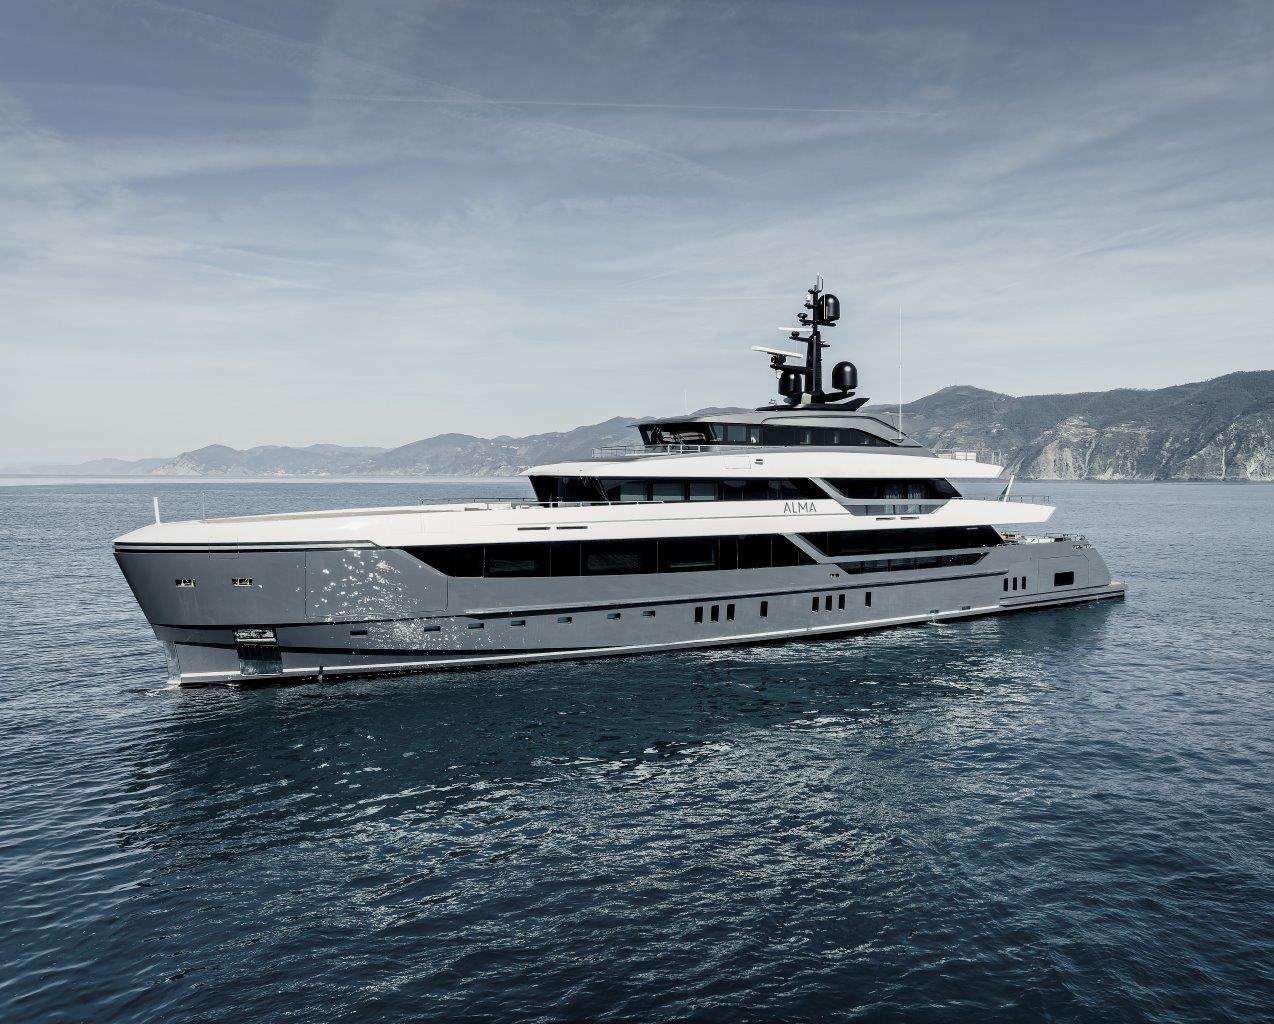 West Nautical Successfully Deliver MY ALMA, the First of the New Sanlorenzo  57 Steel Models - West Nautical